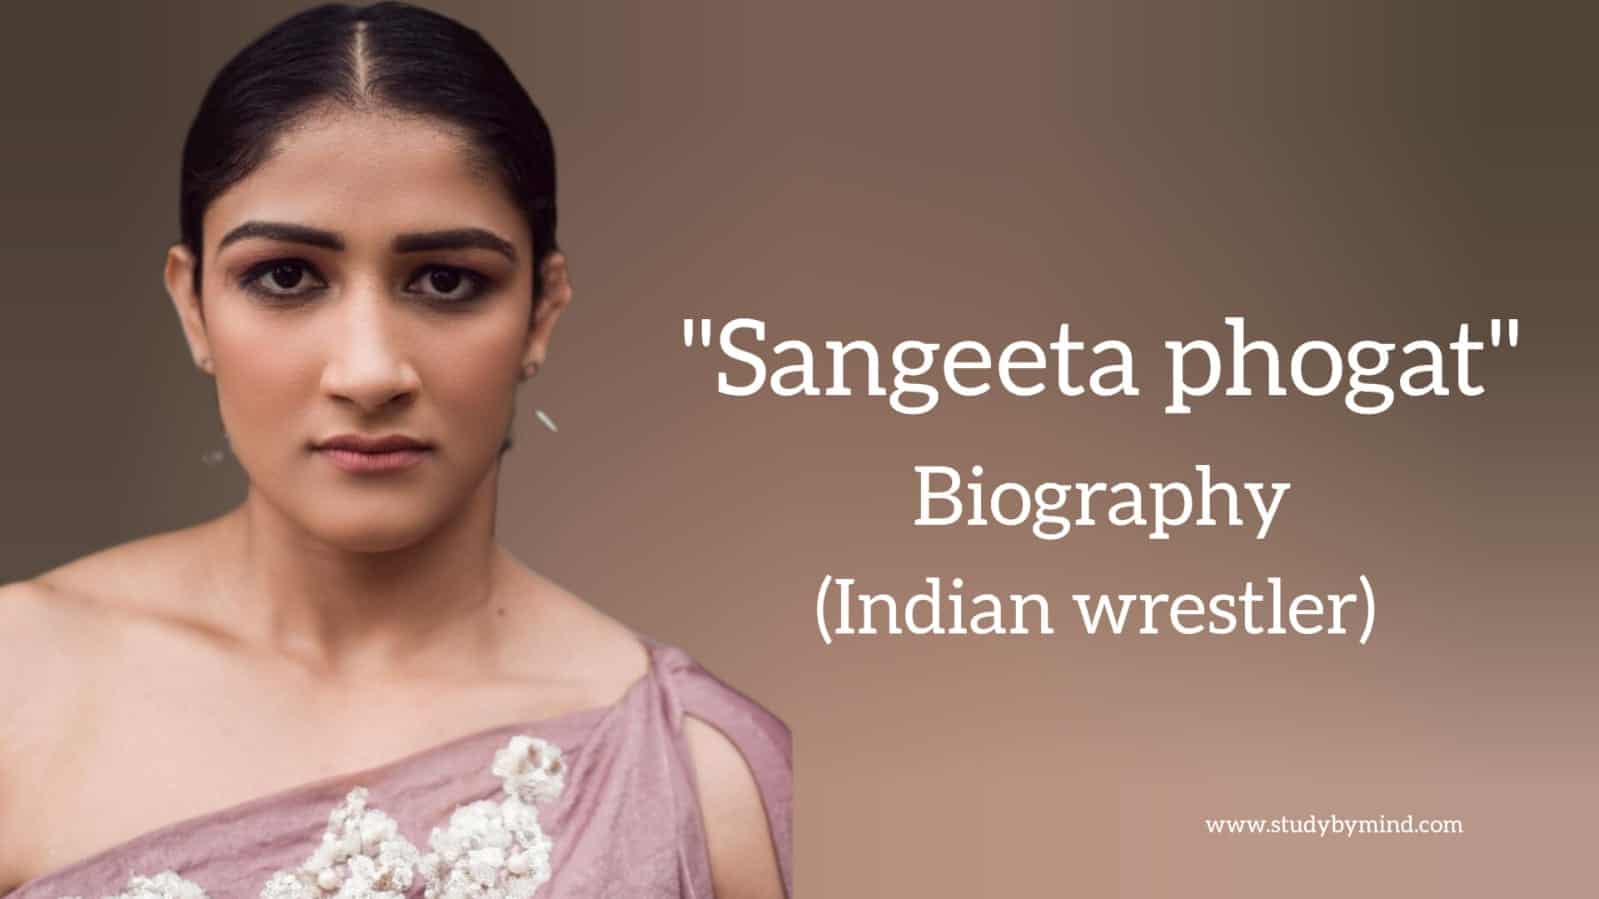 You are currently viewing Sangeeta phogat biography in english (Wrestler)